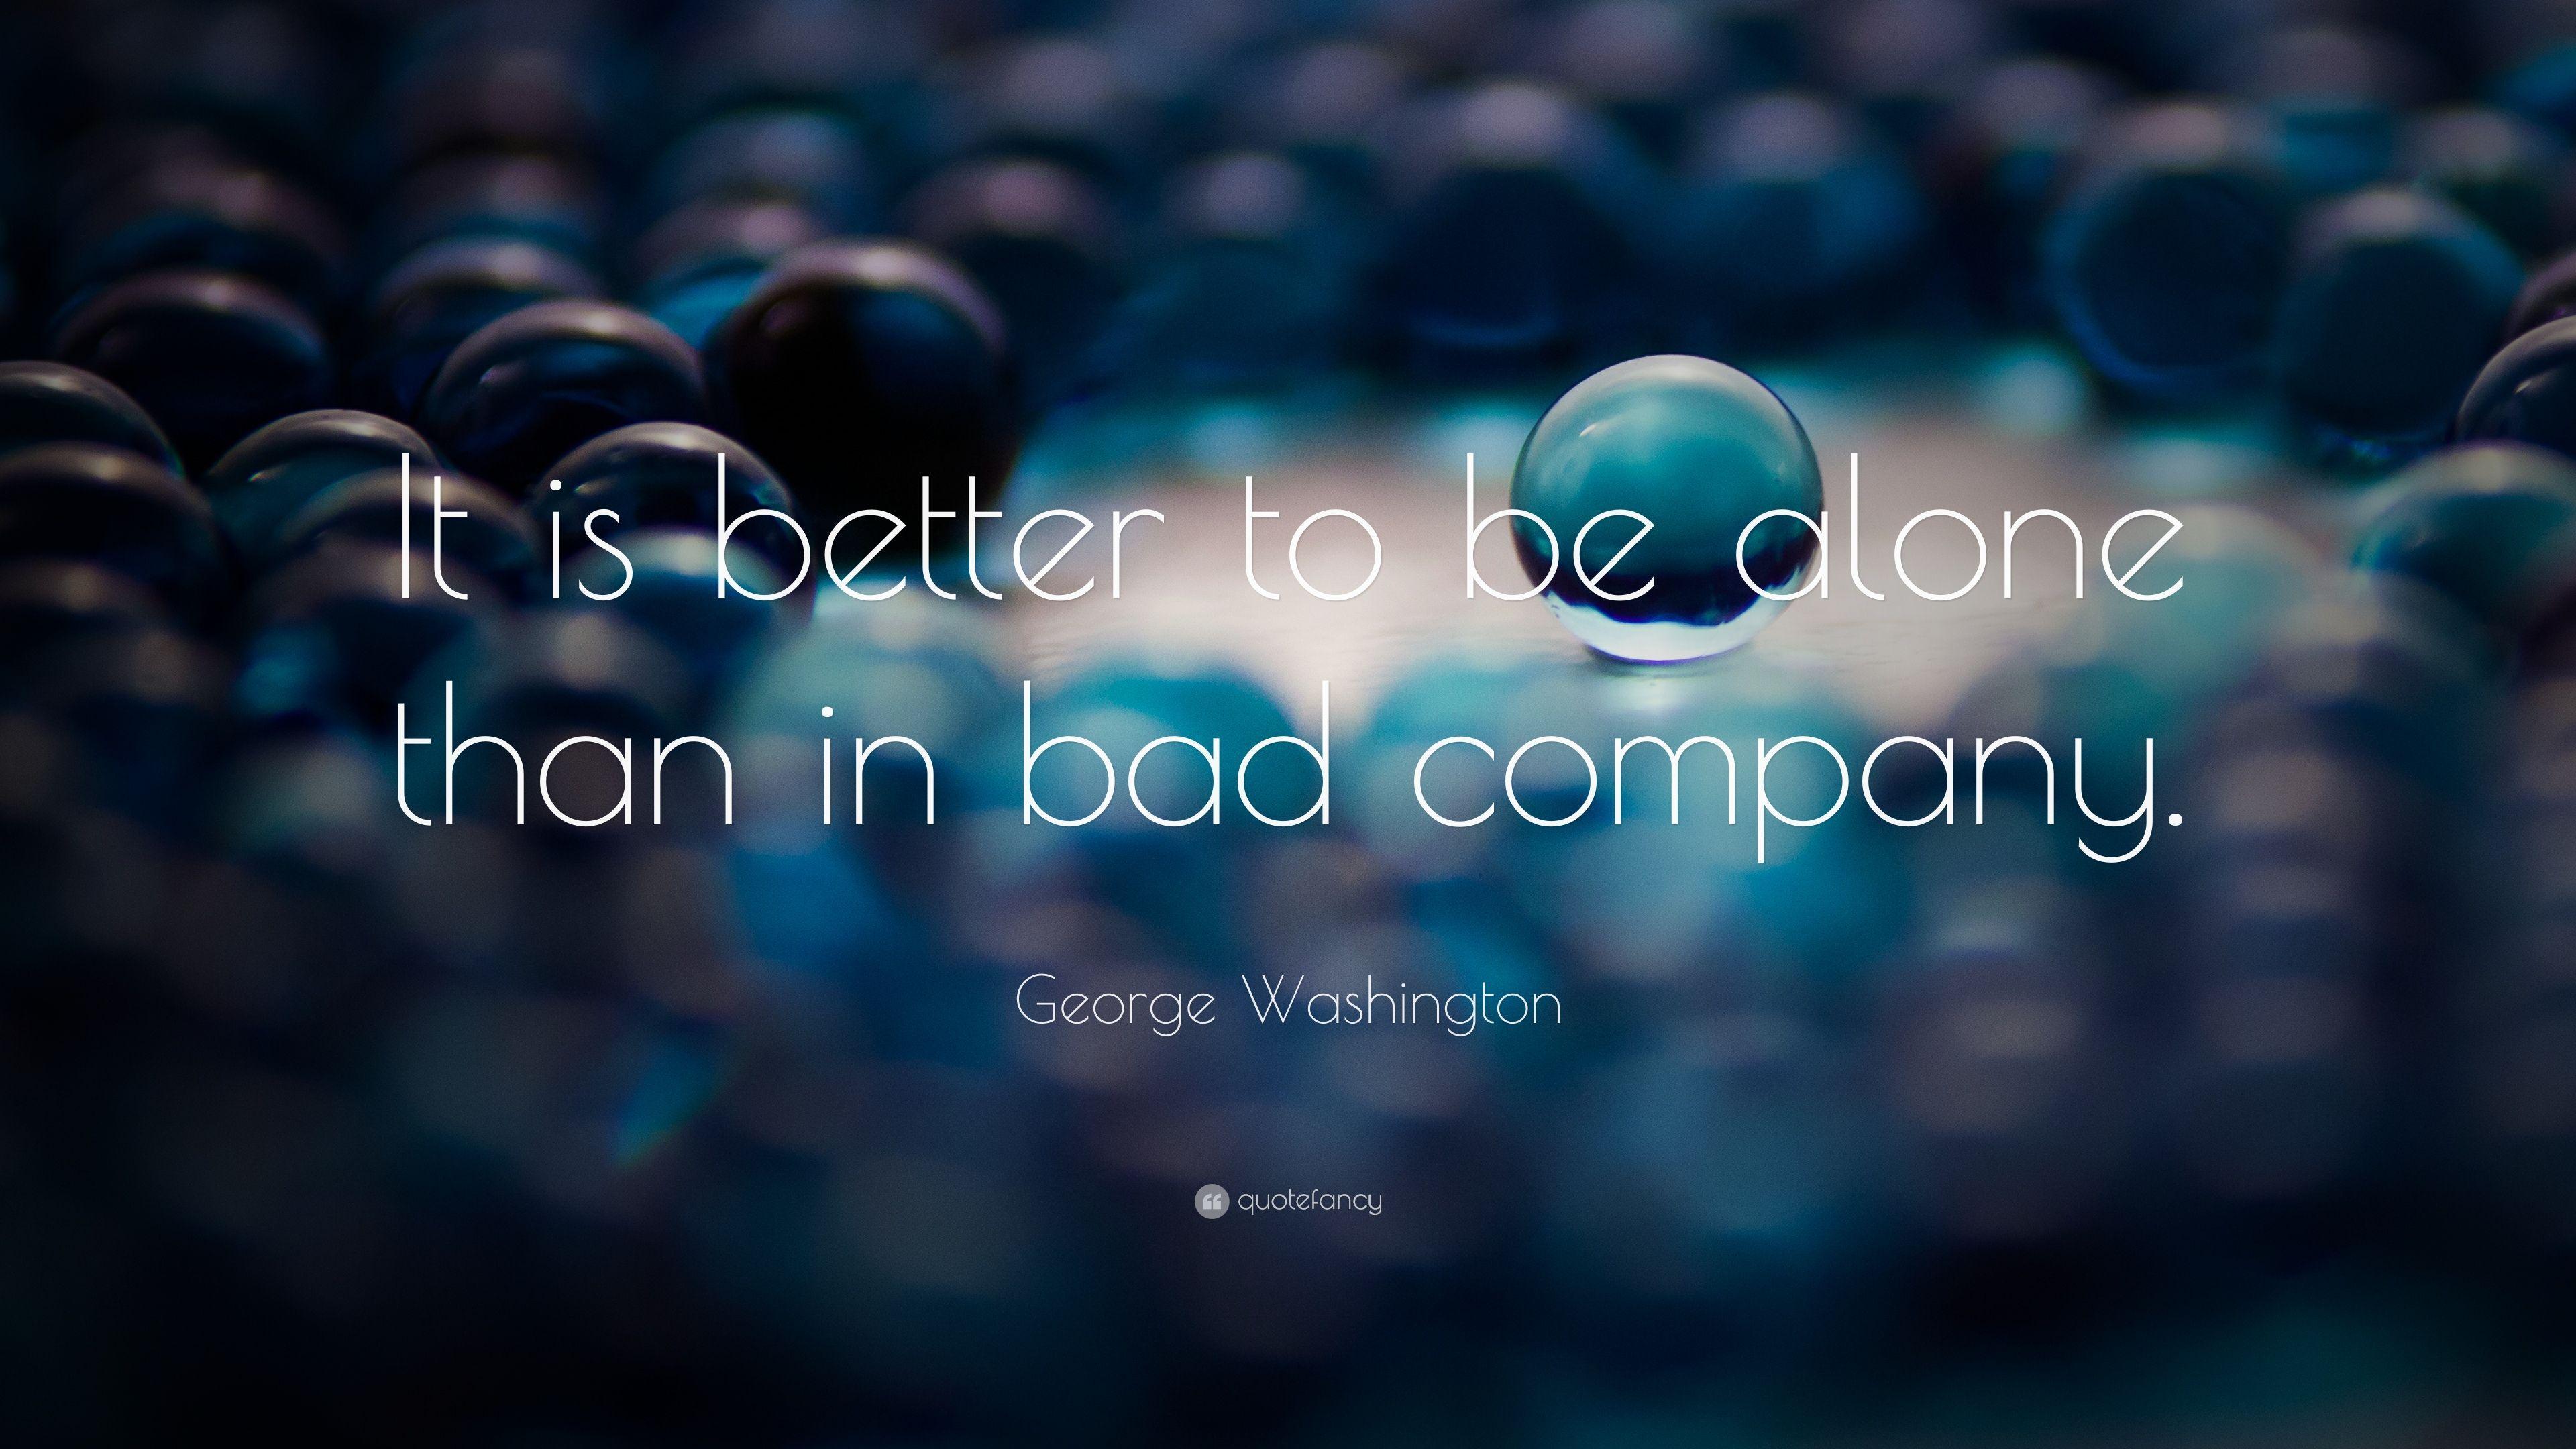 George Washington Quote: “It is better to be alone than in bad